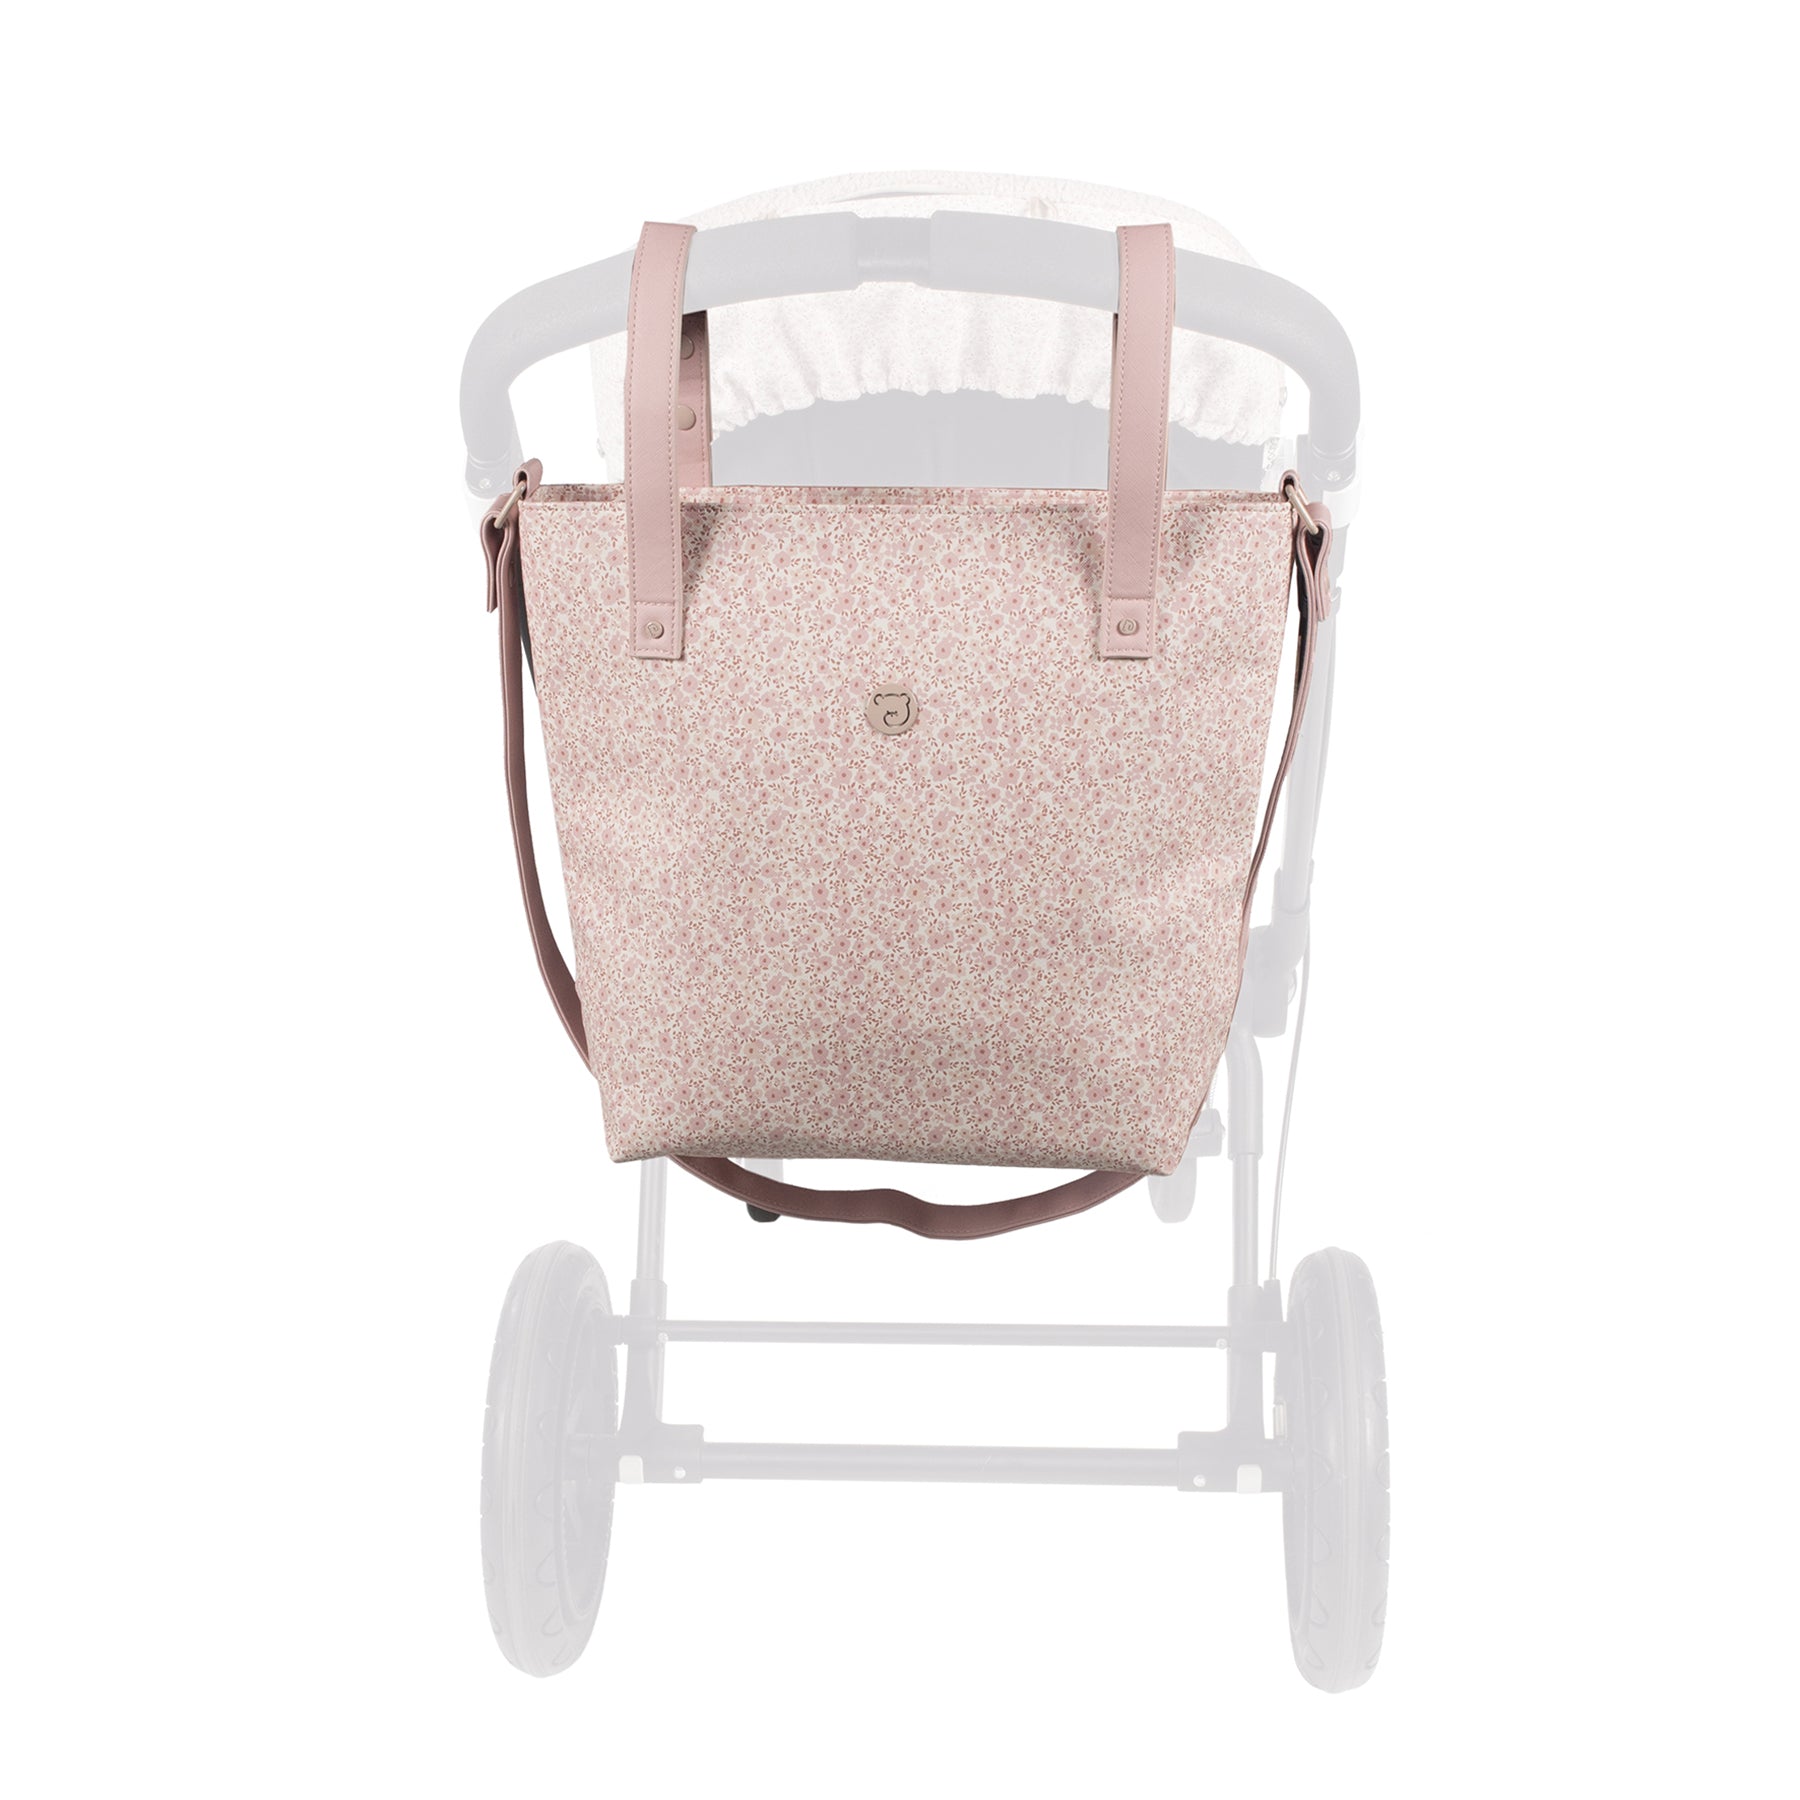 Pasito a Pasito Flower Mellow Pink Stroller Caddy Diaper Changing Bag